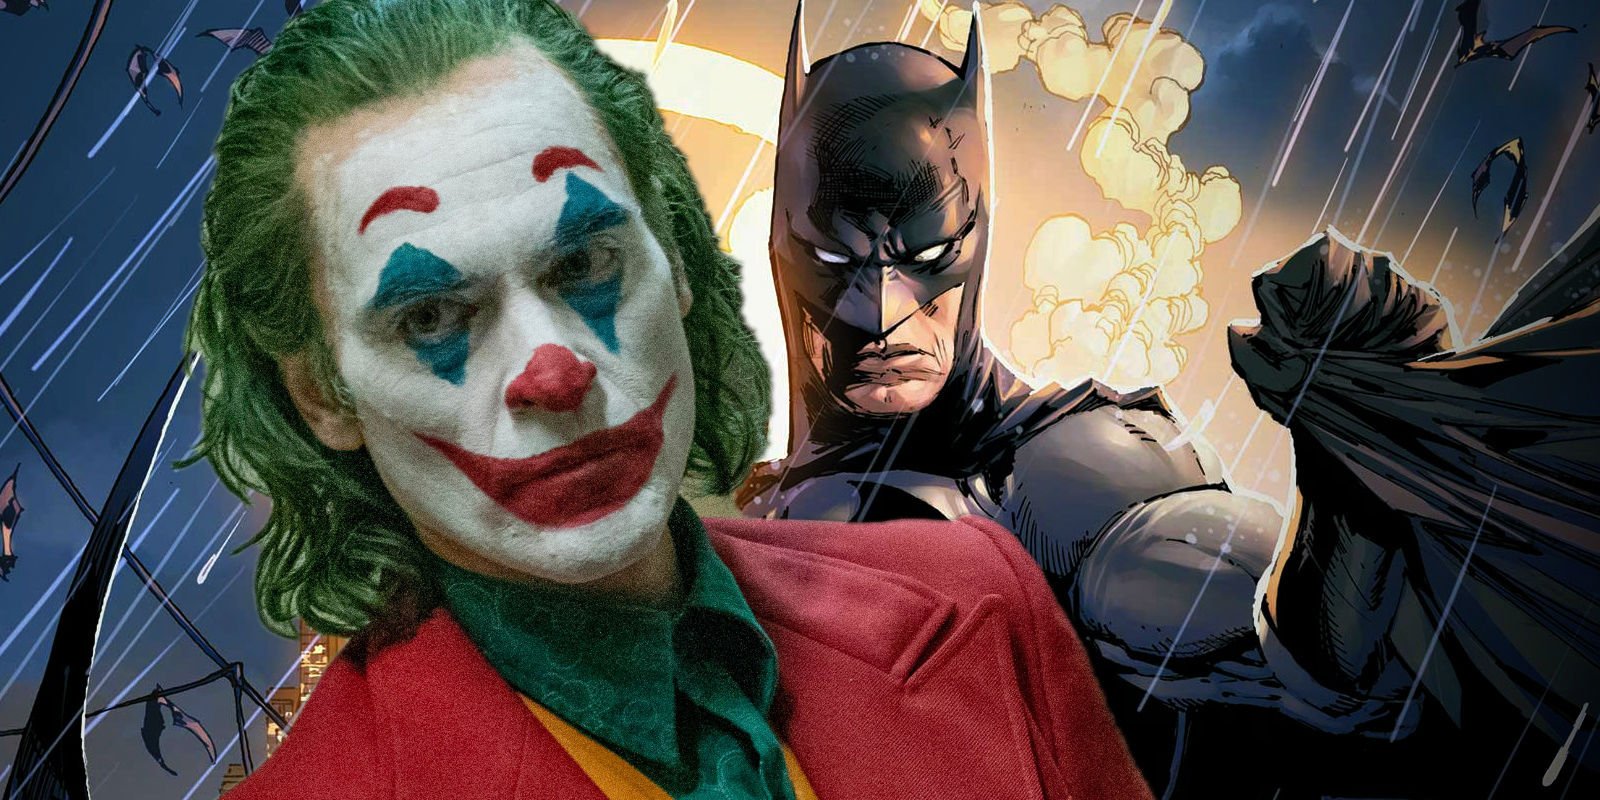 Warner Bros. Searches For New Chief Of DC Films; Joker’s Acclaimed Director Rumored for DC Films Advisory Role